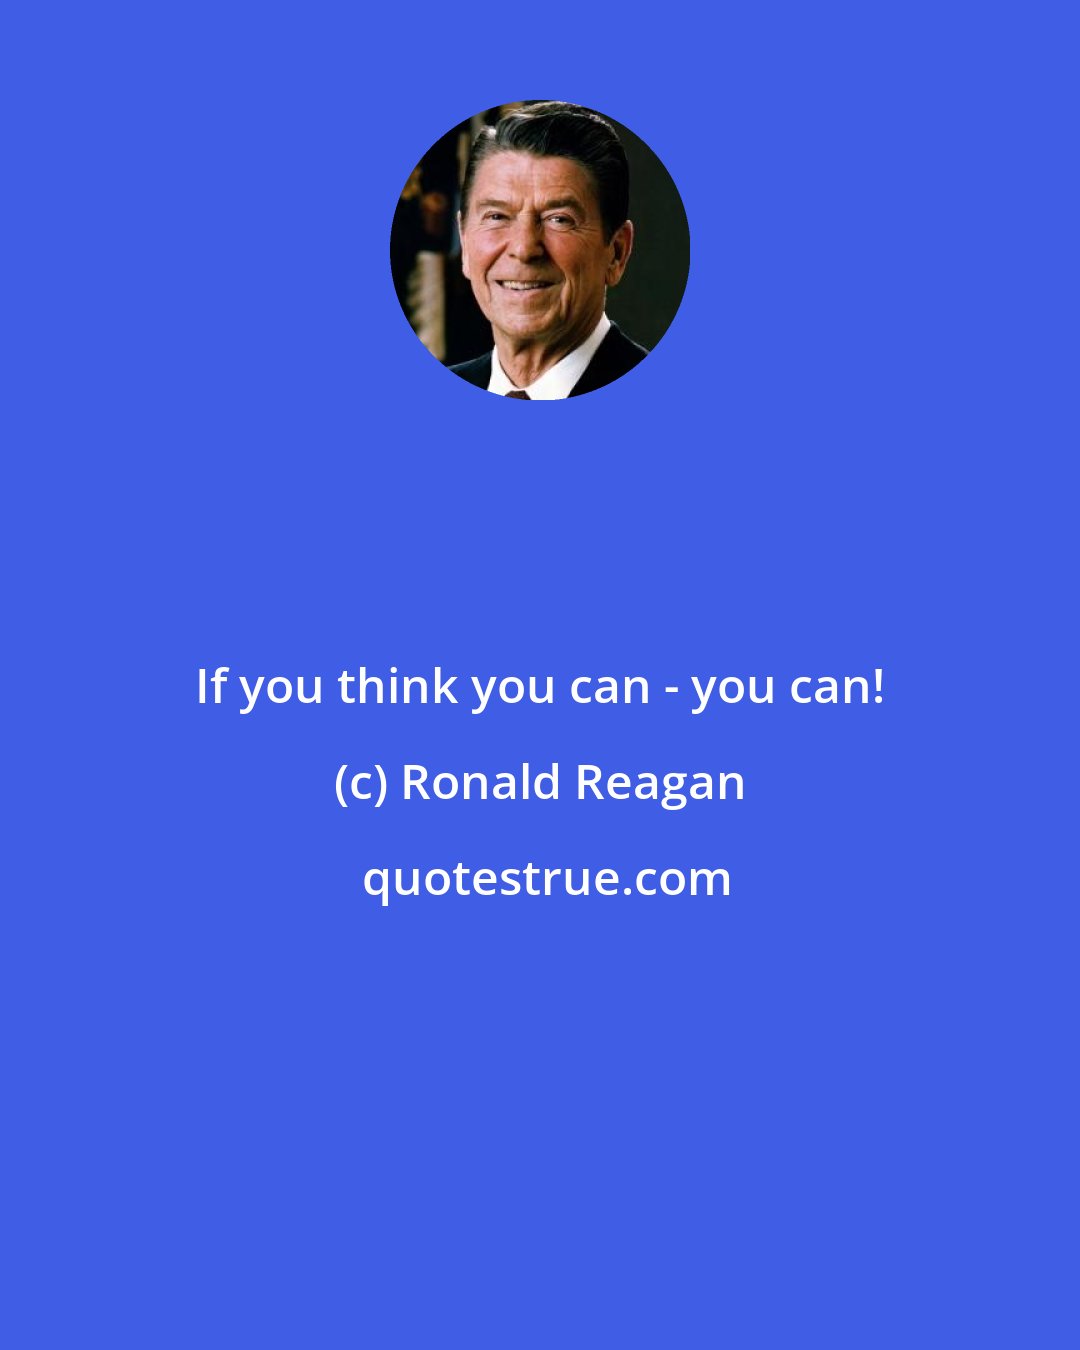 Ronald Reagan: If you think you can - you can!